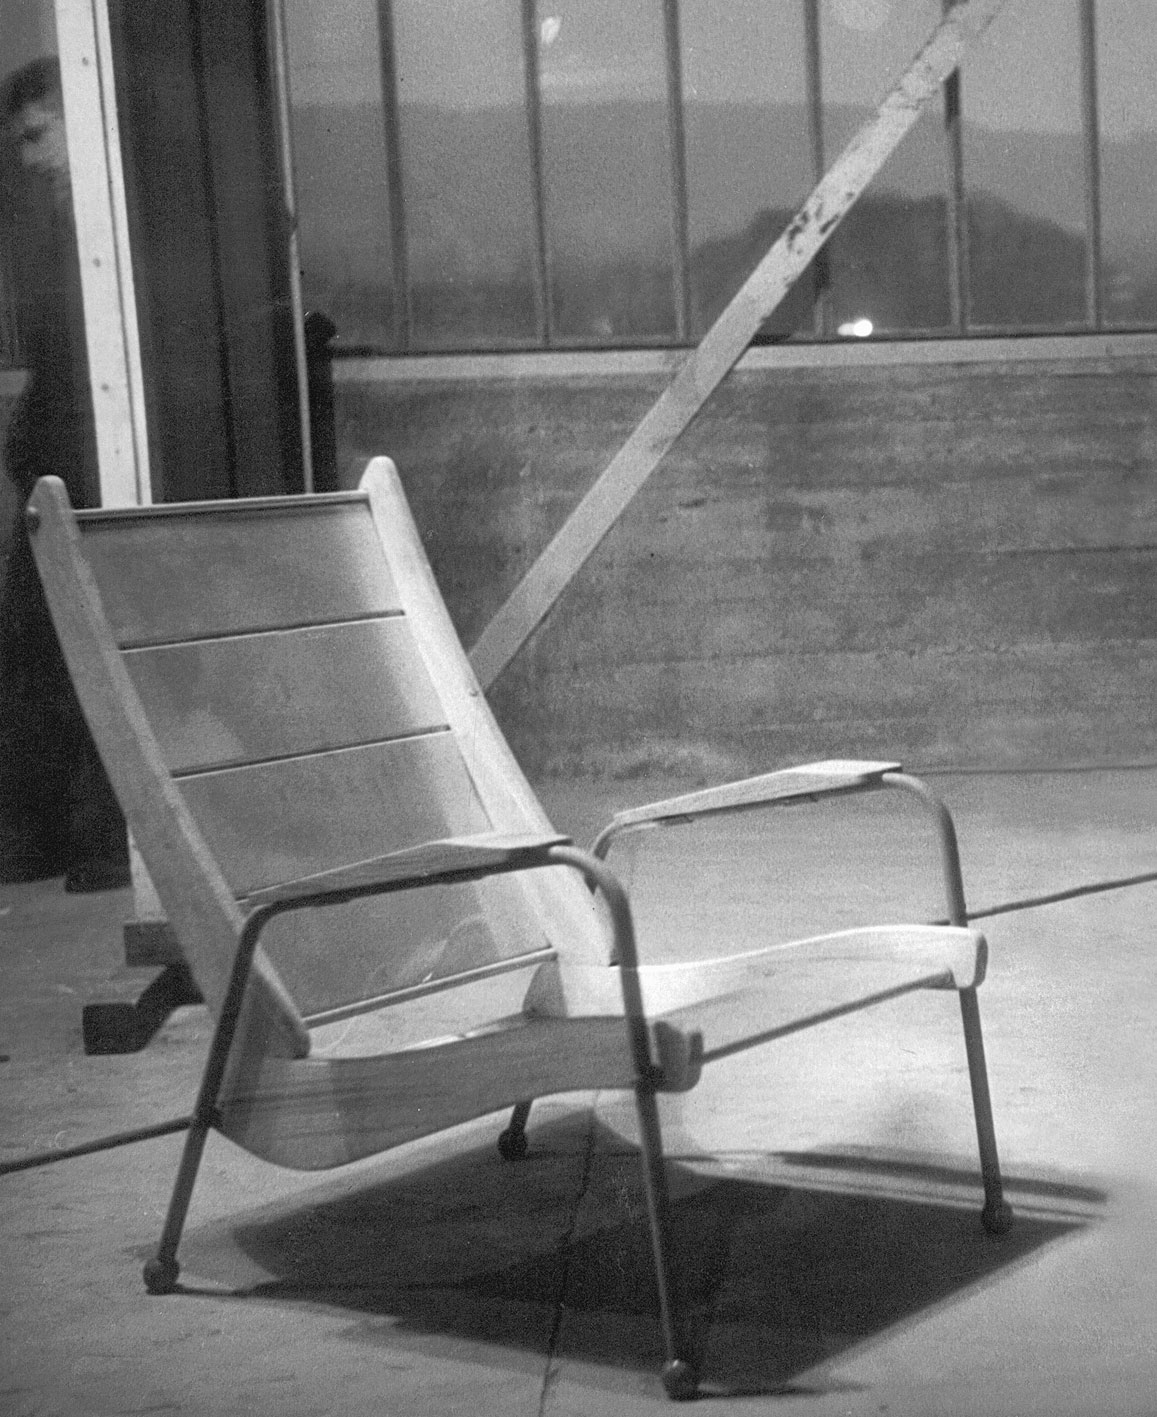 Colonial FC 10 armchair, ca. 1949. Prototype in the workshop.